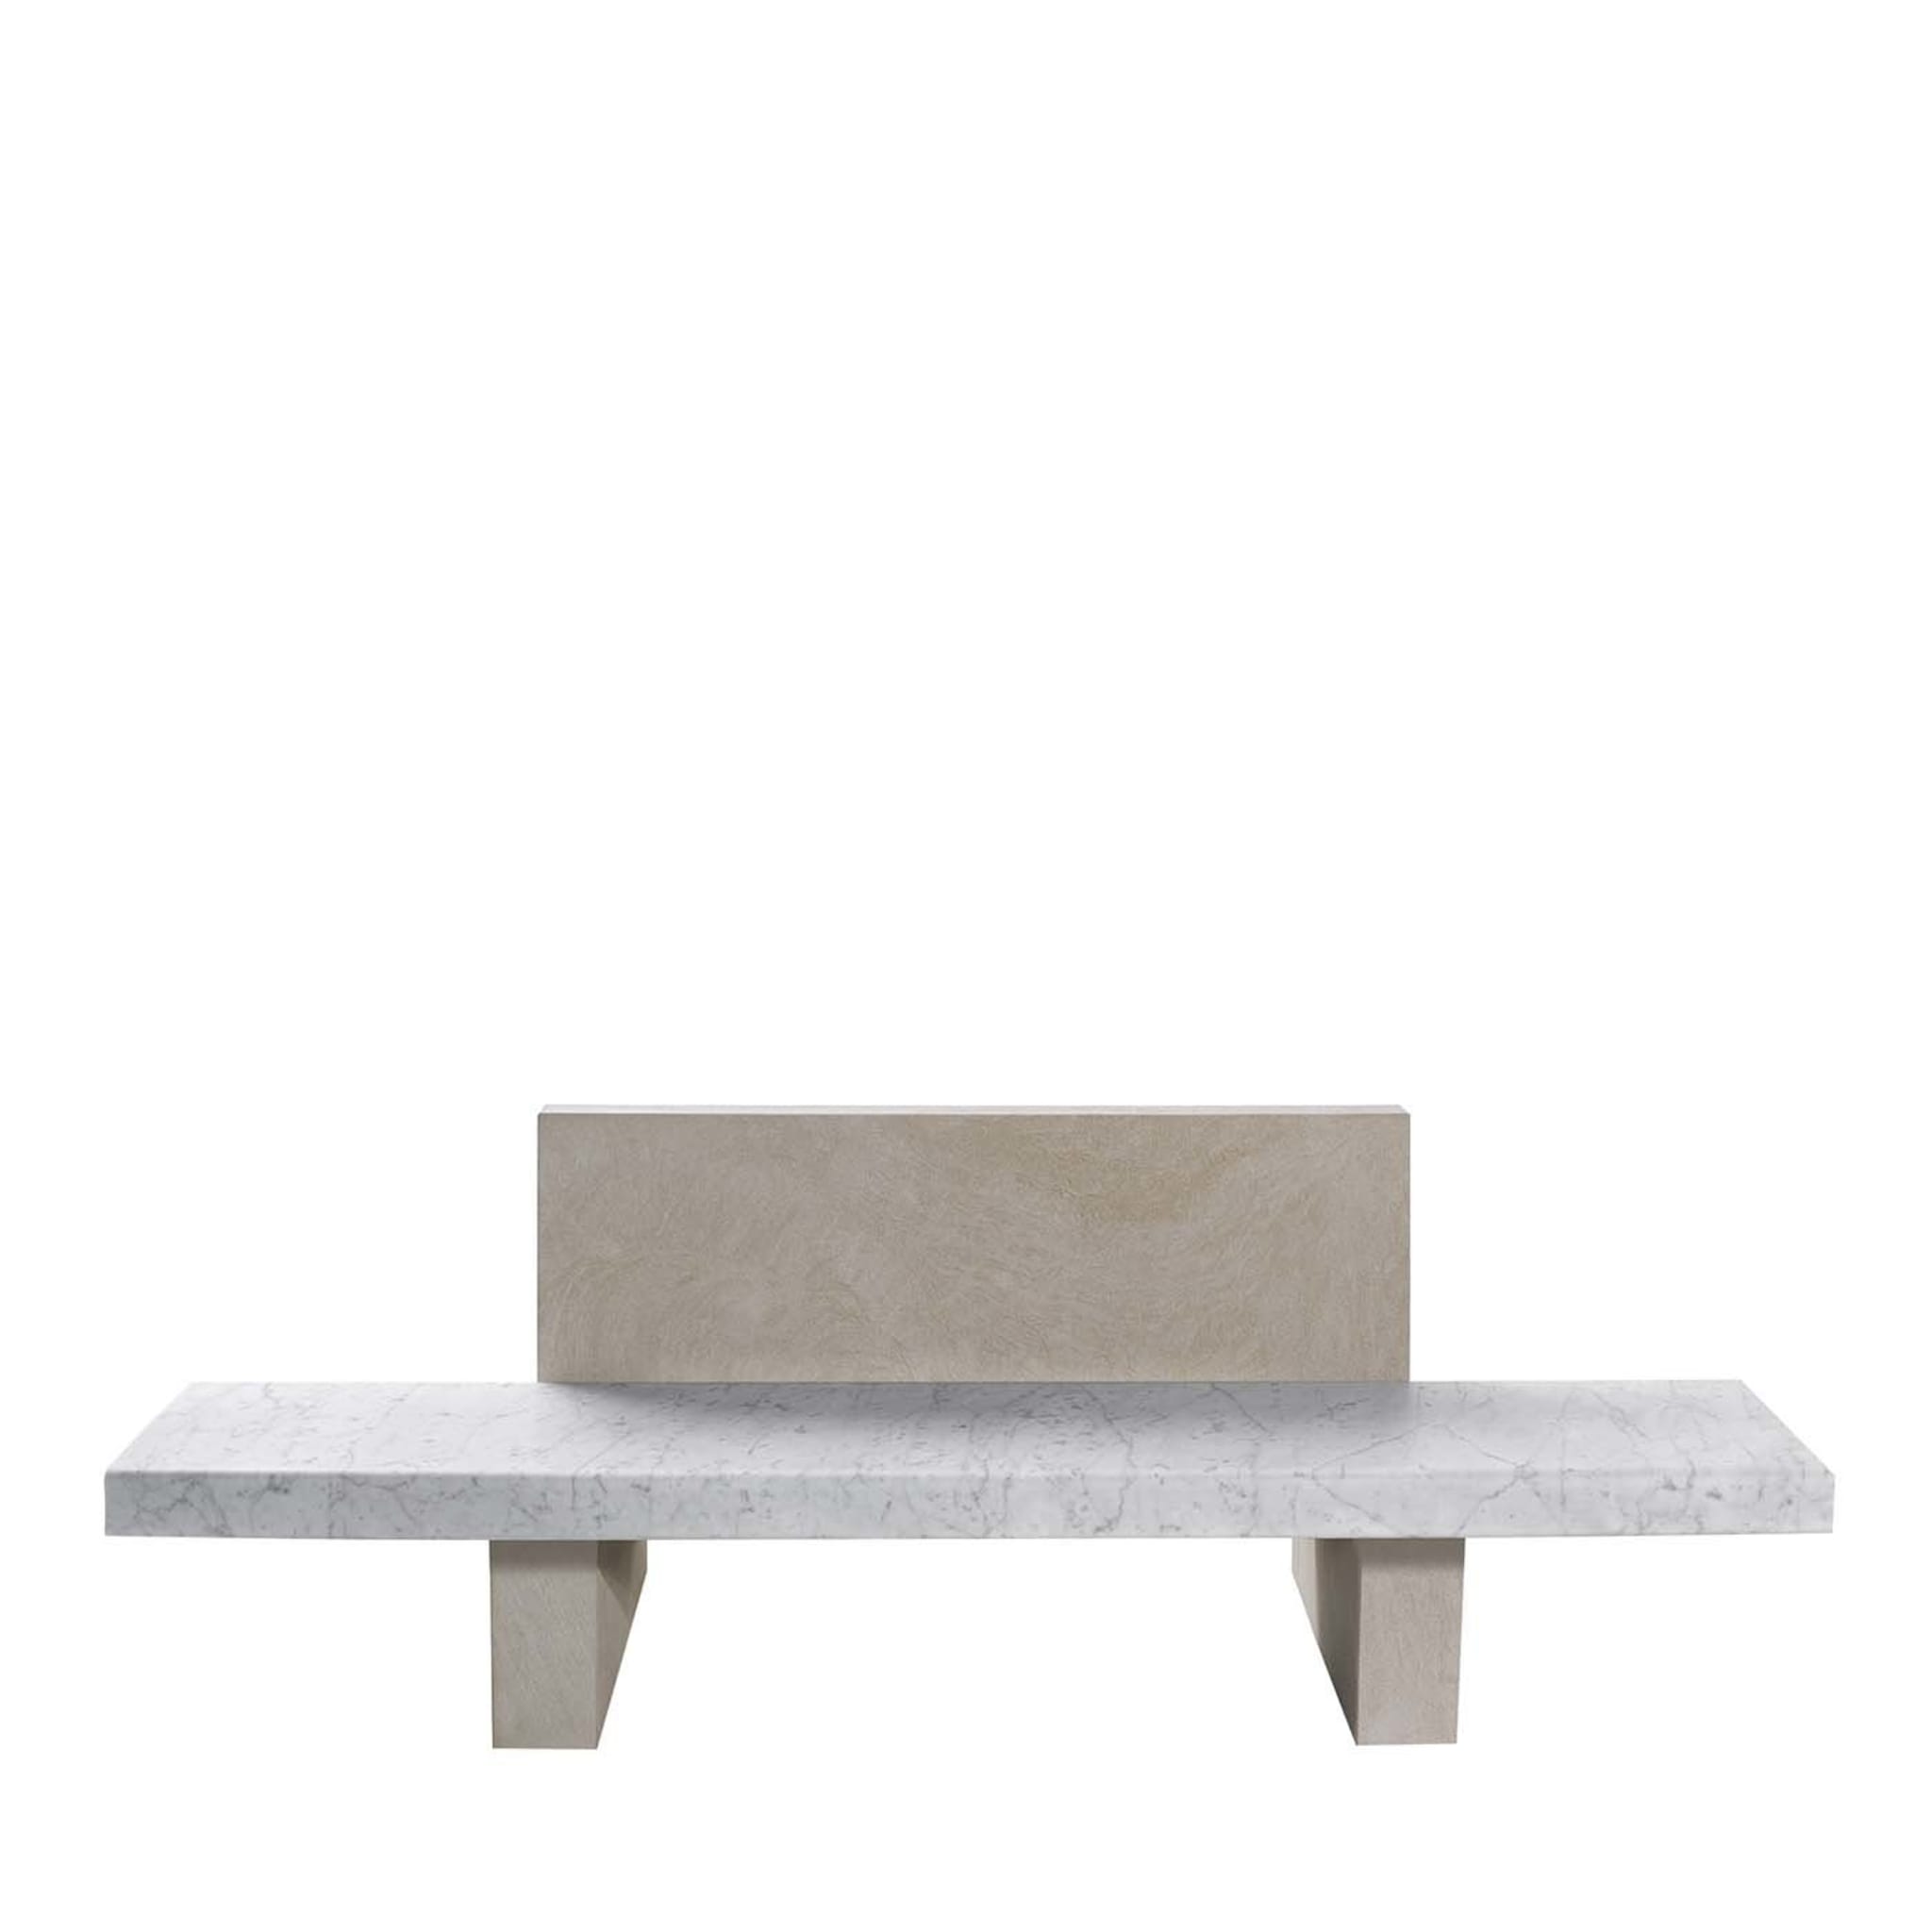 Span Outdoor Bench with Backrest by John Pawson - Main view